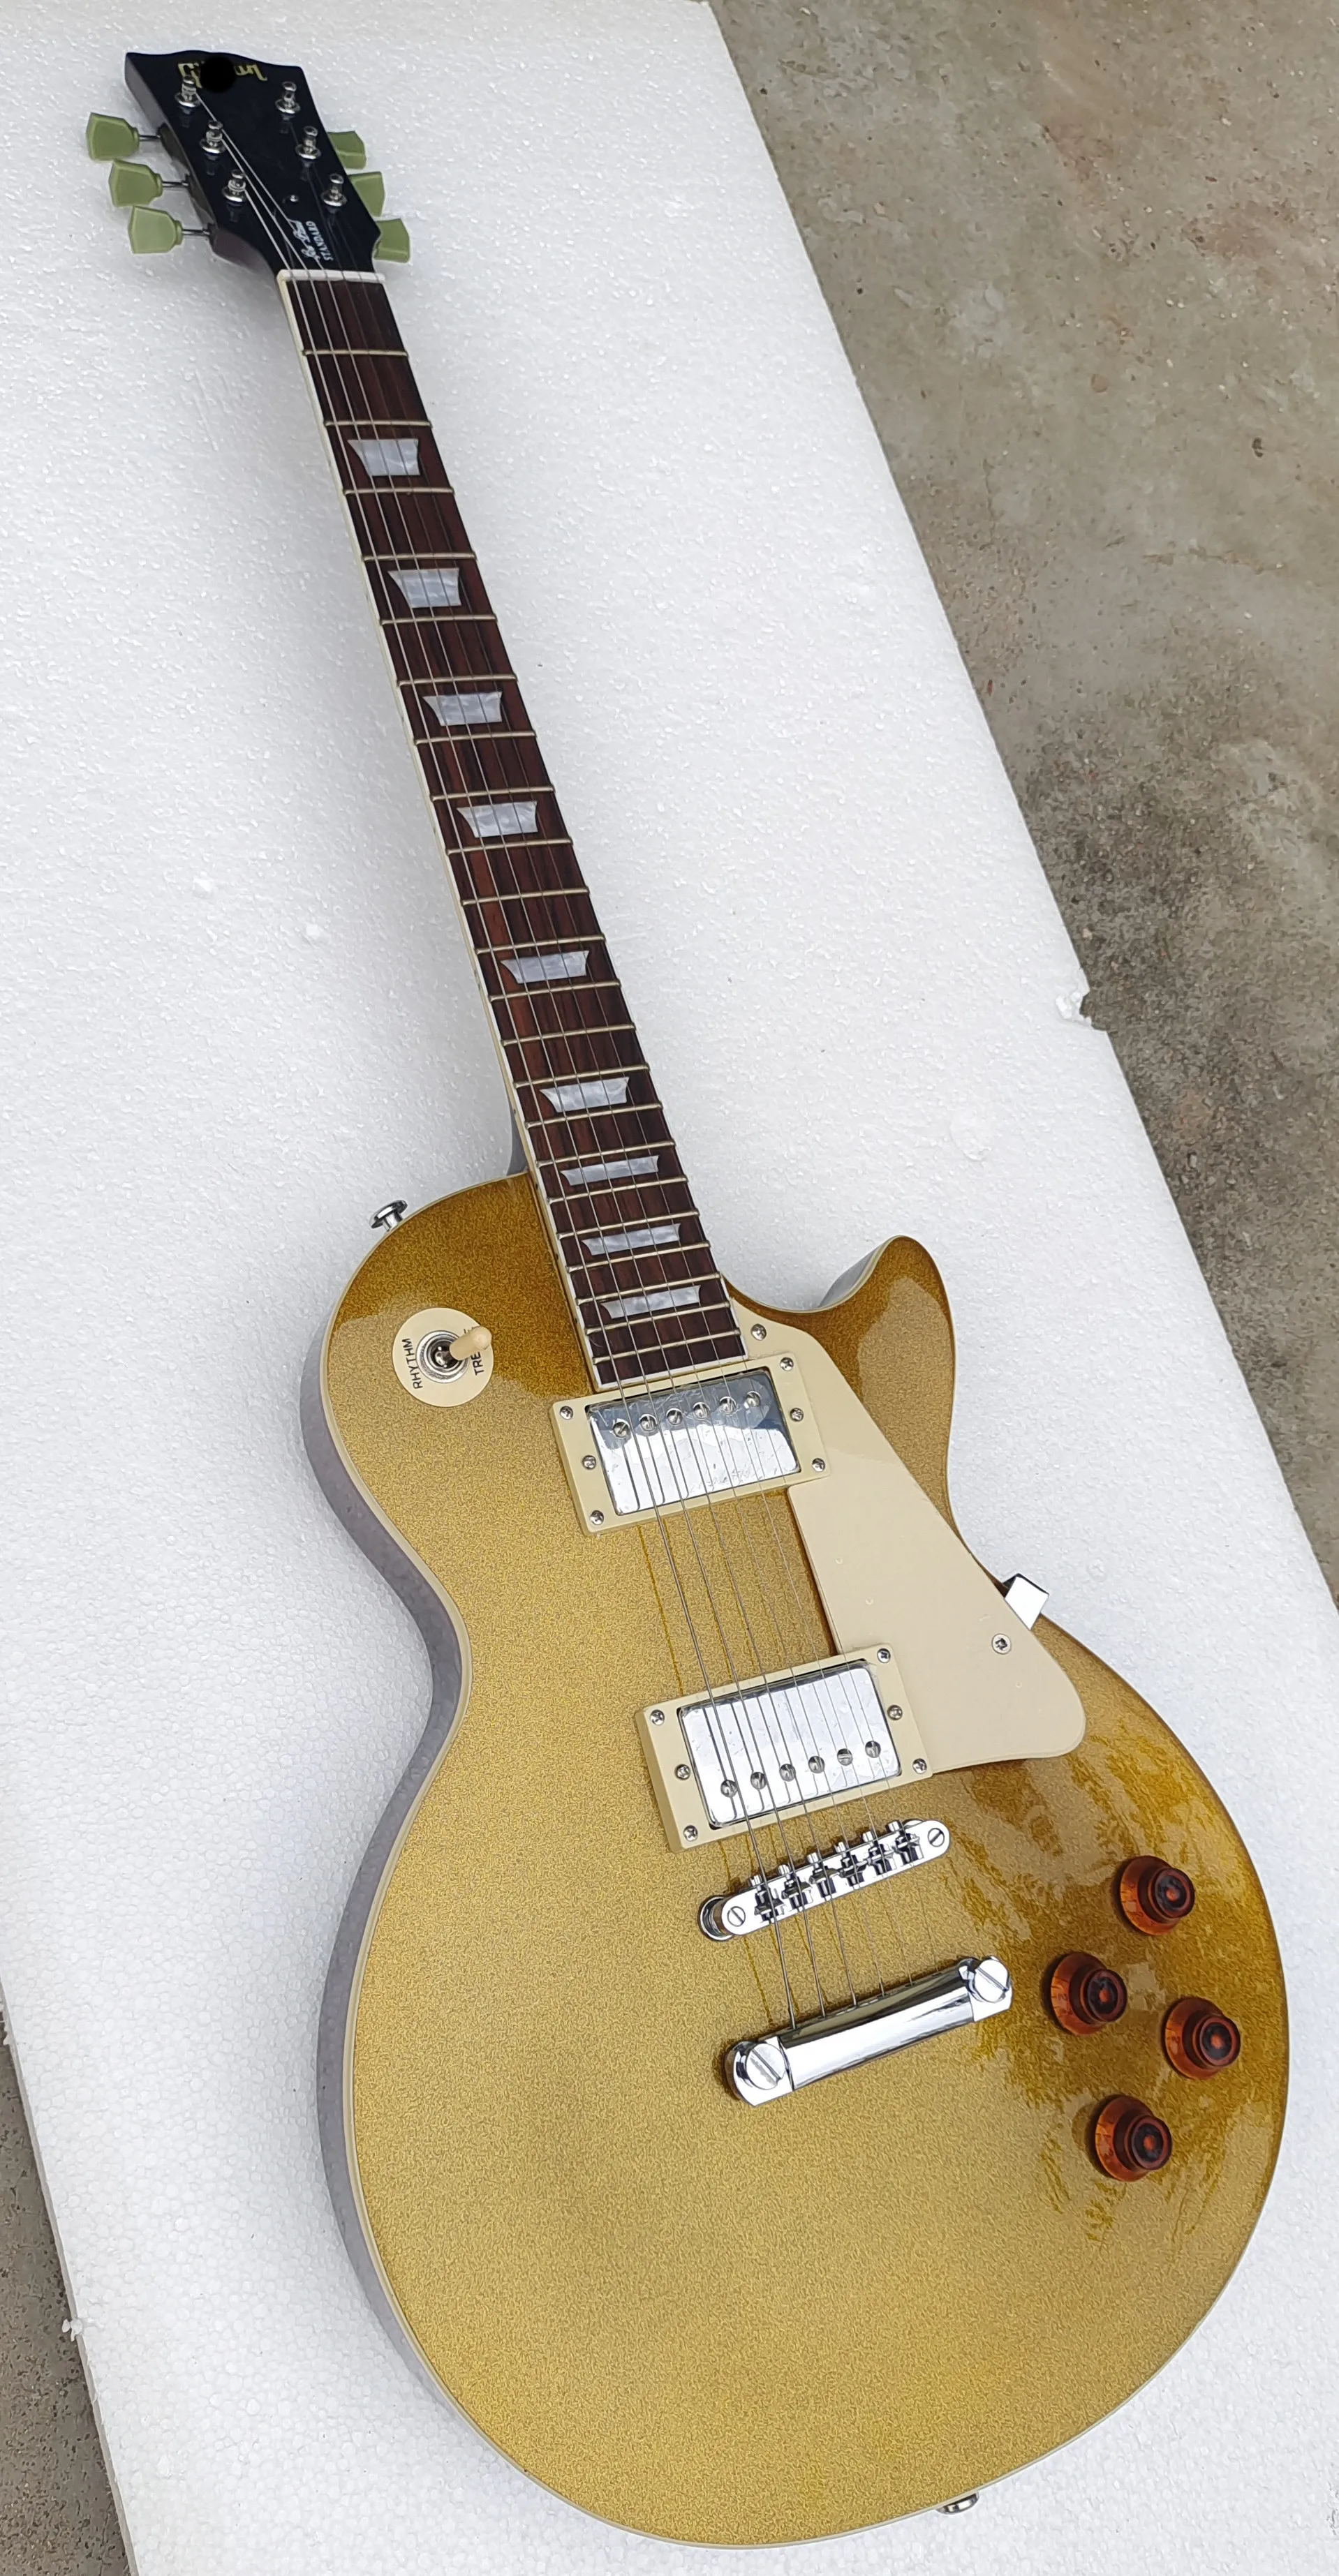 Electric guitar, golden flash, environmentally friendly paint, guitar on sale, lightning delivery, free shipping